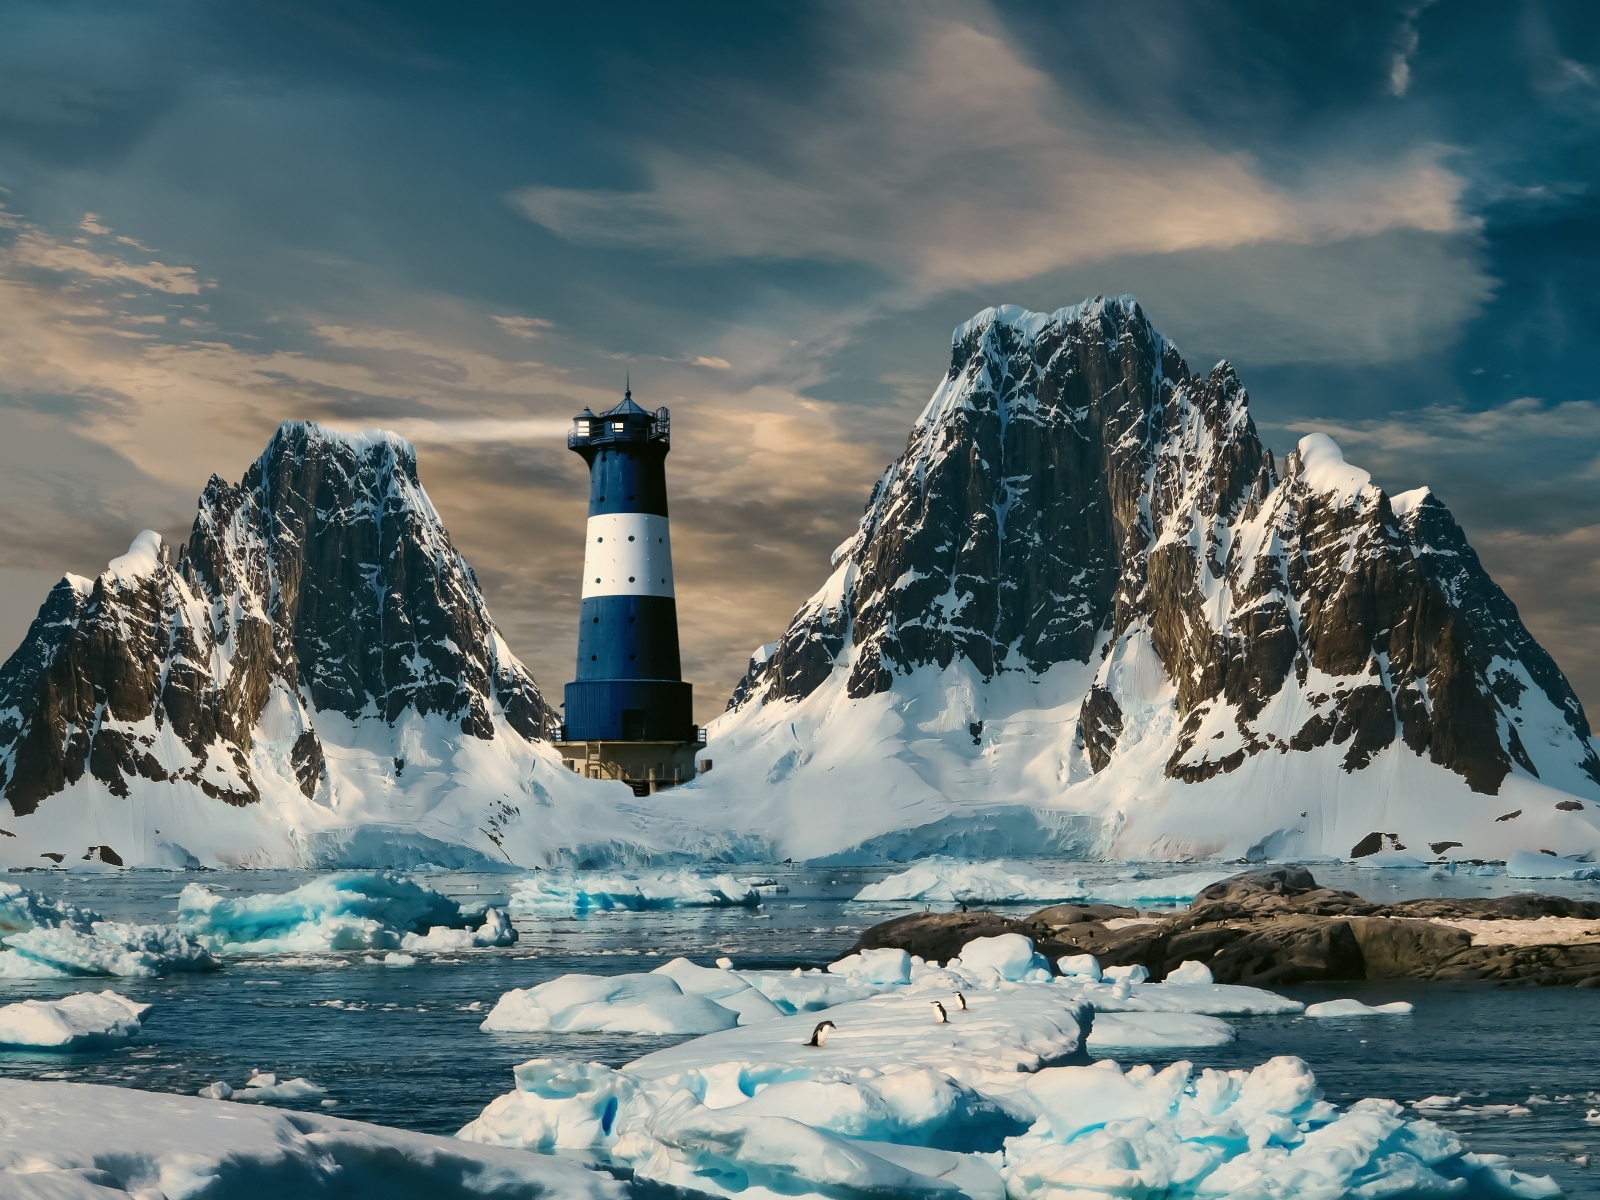 Large ice floes in the water near a lighthouse in the mountains, Antarctica